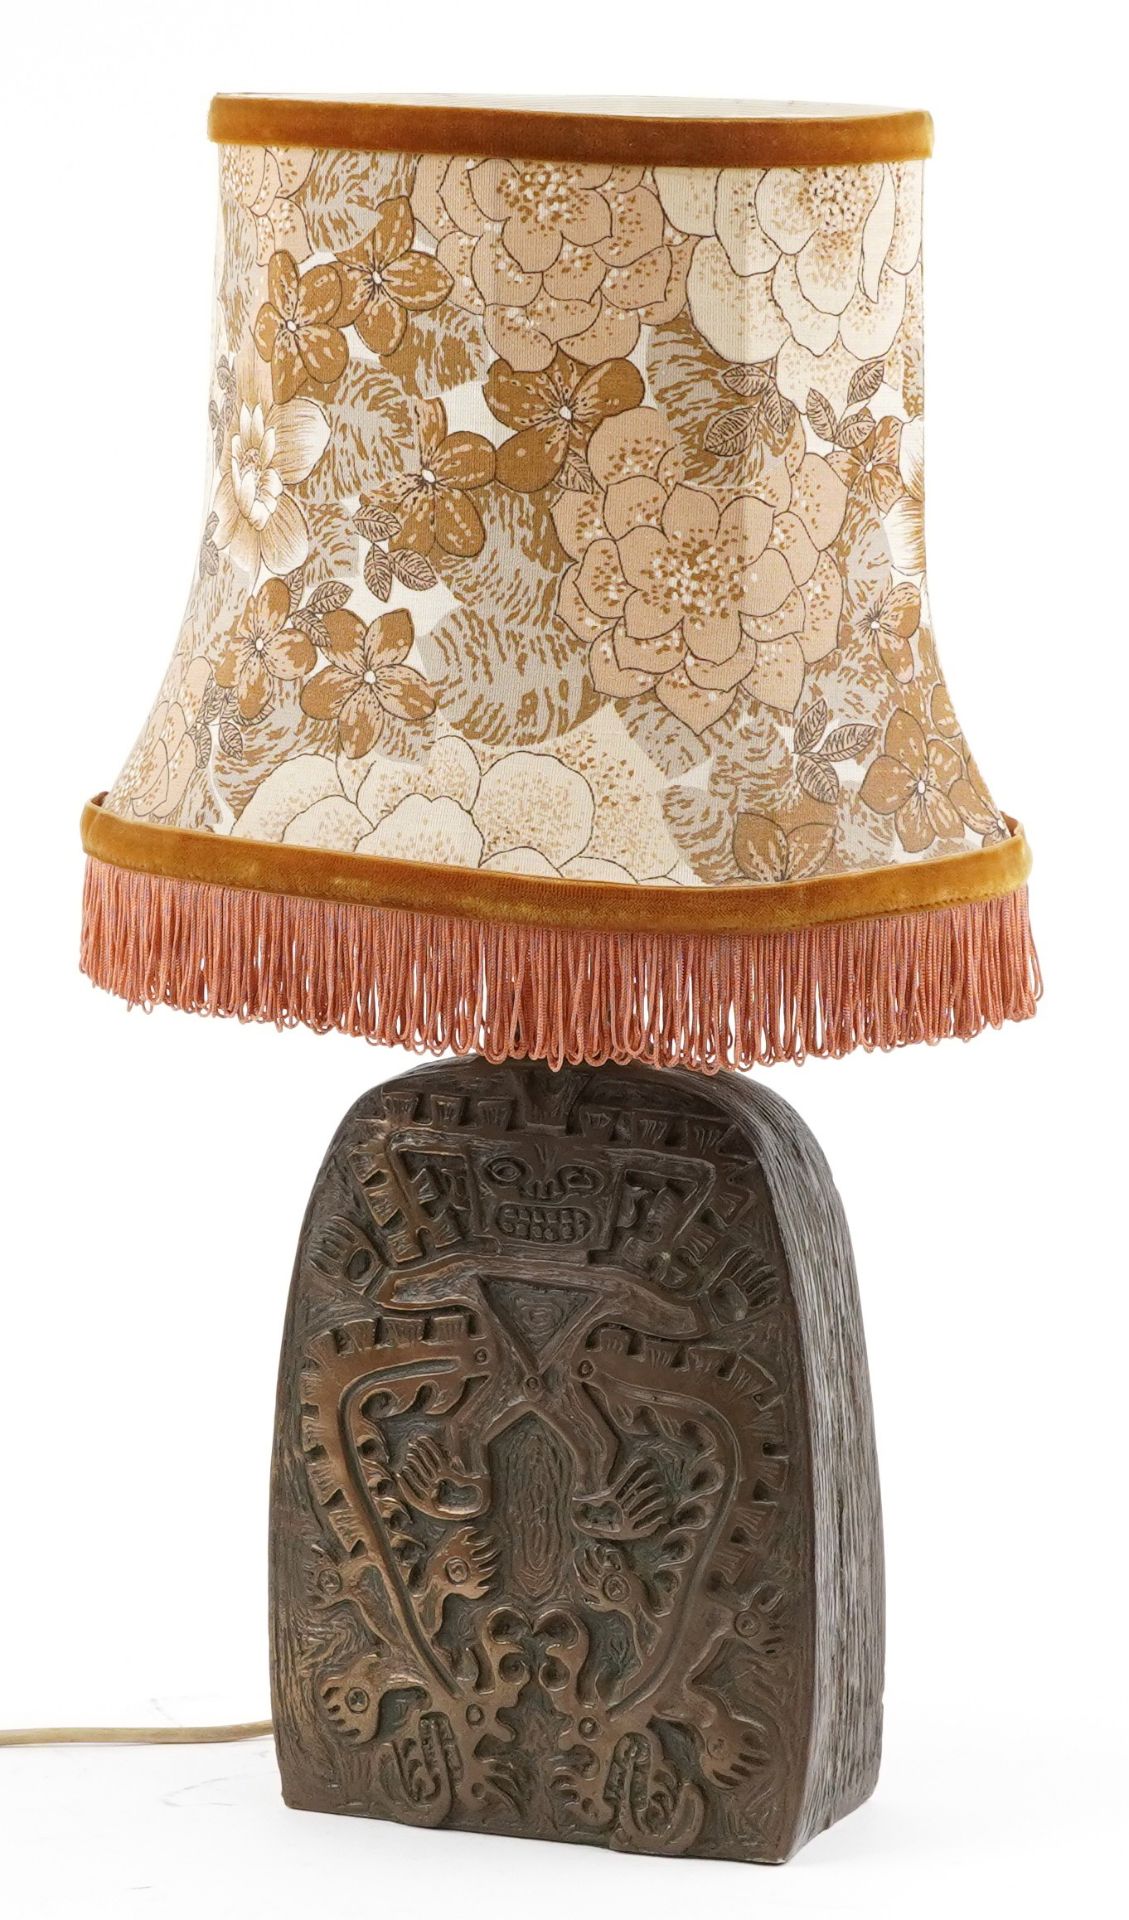 Mid century style cold cast bronze table lamp with shade decorated in relief with mythical